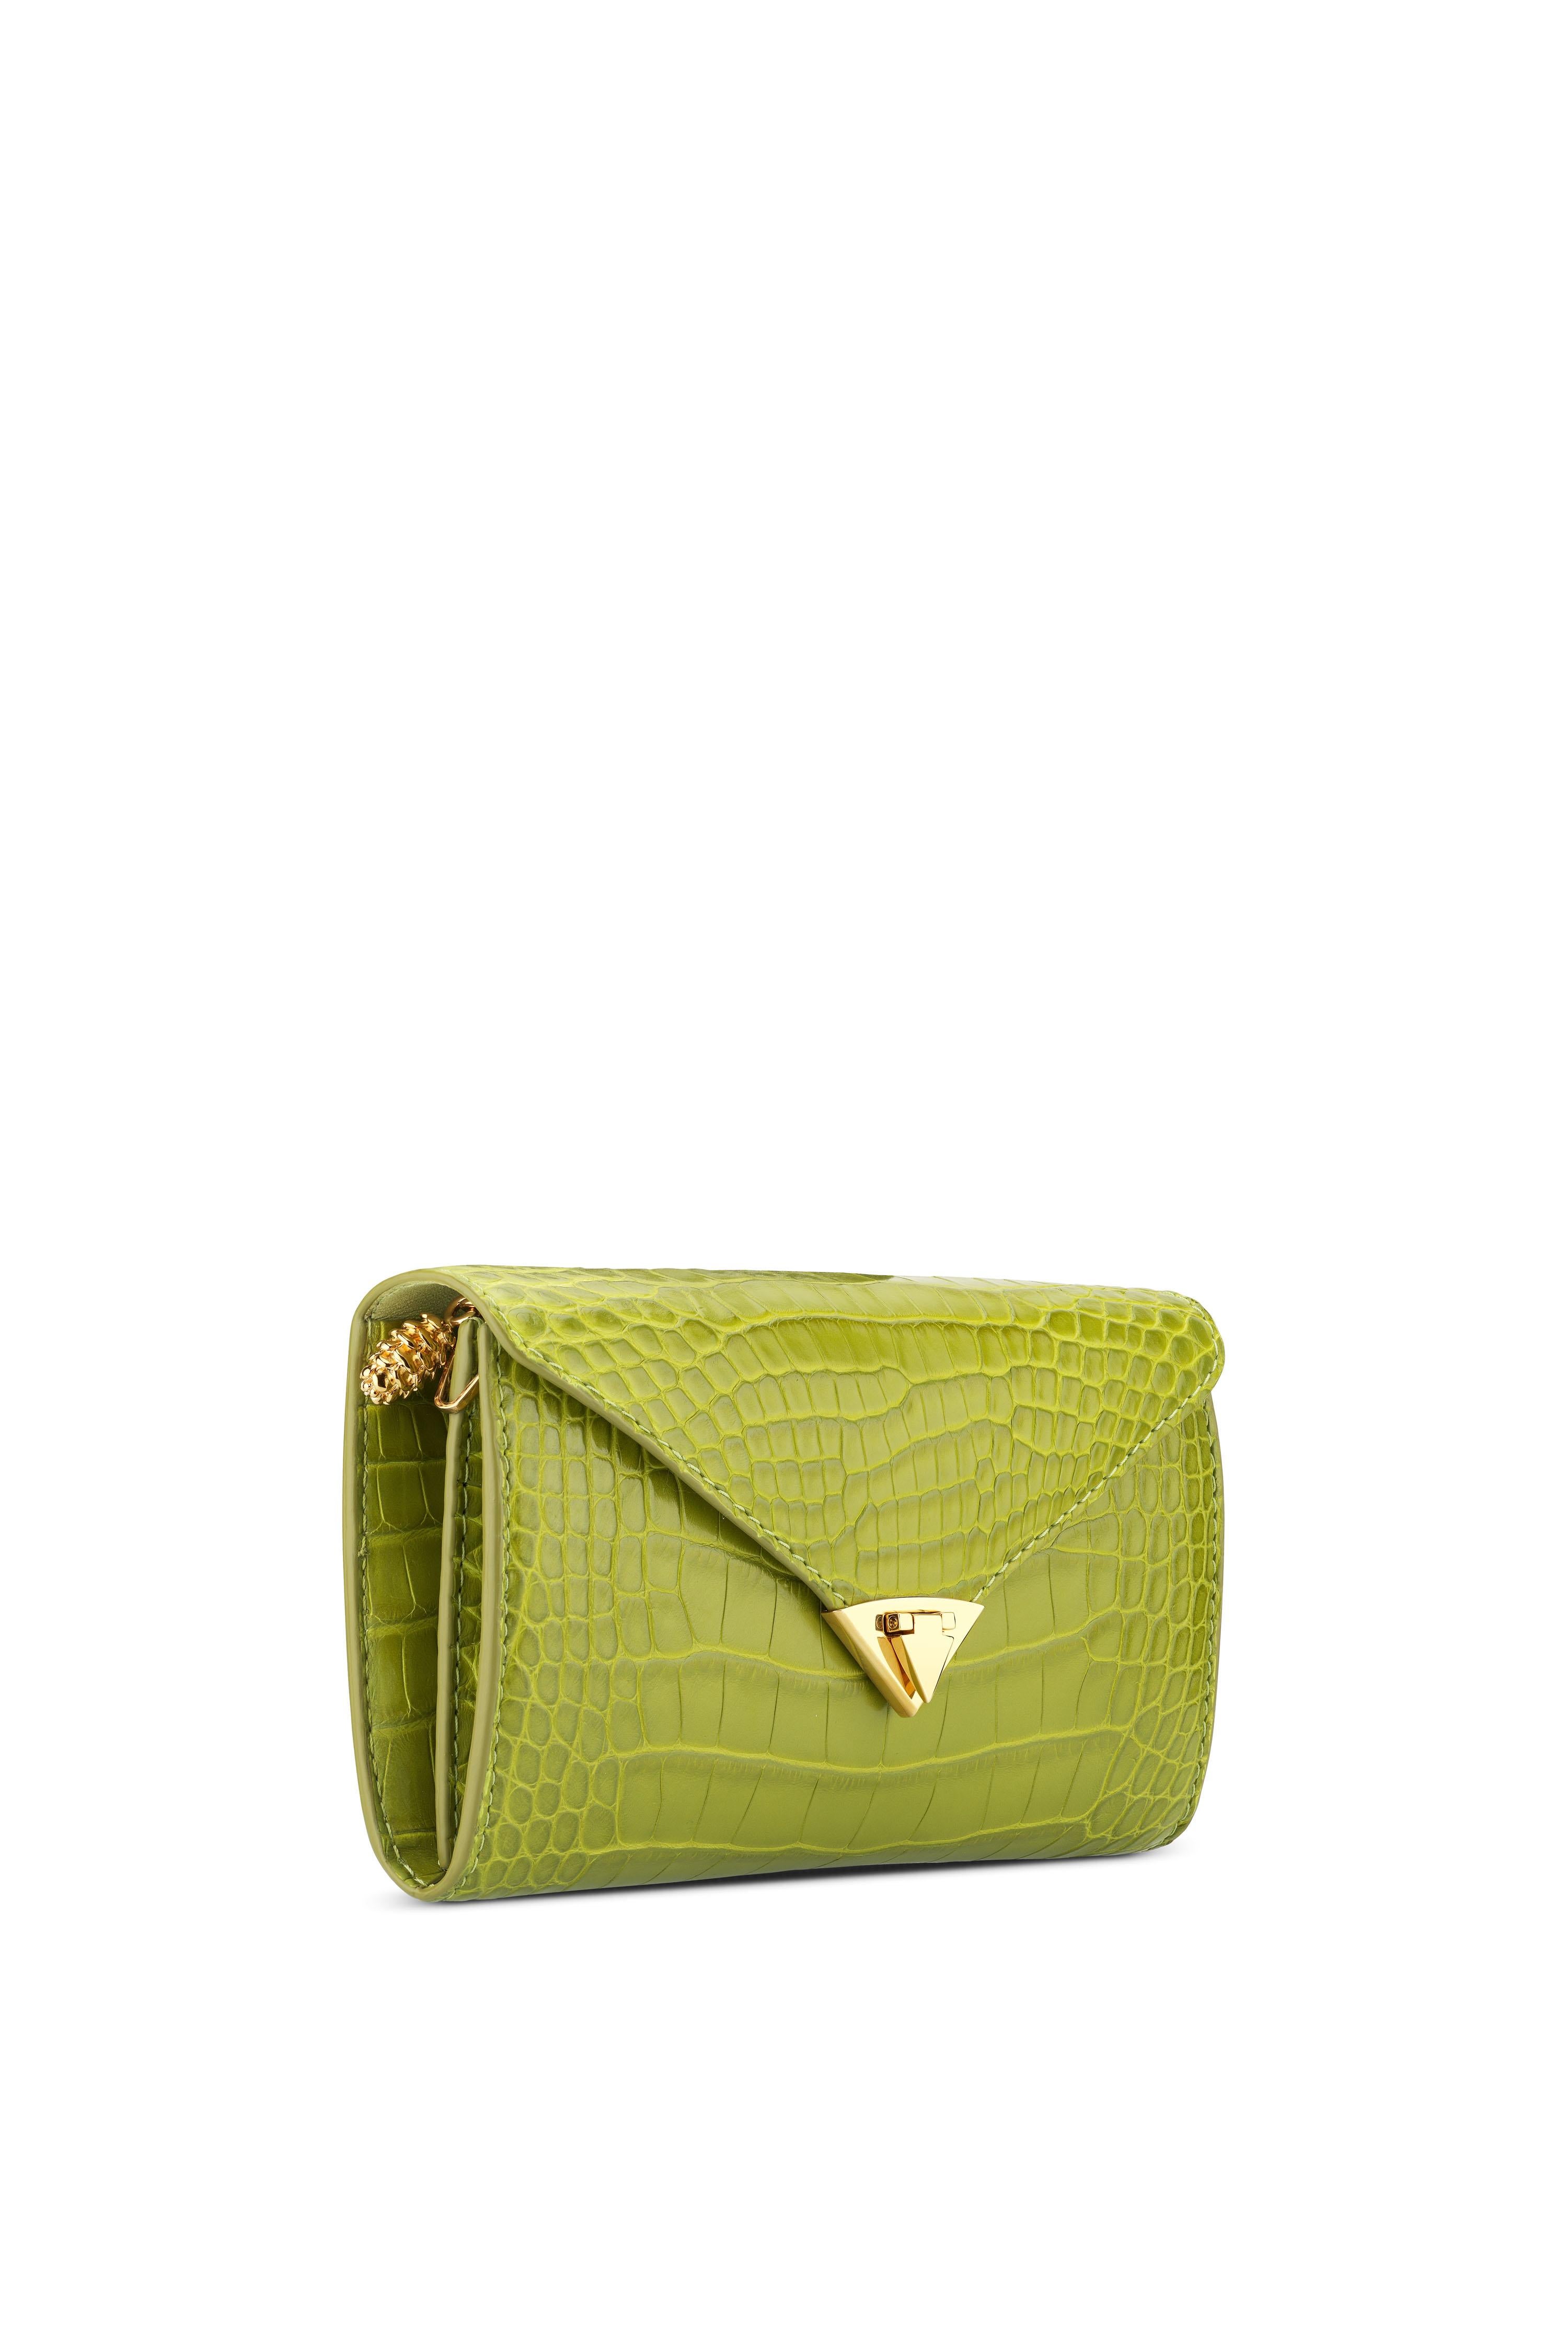 The Alex Wallet Olive Martini Alligator Gold Hardware is designed with a detachable gold cross-body chain, interior credit card slots and a pinecone pull zip pocket. It features our signature spear-lock closure and Thayer blue leather lining.

Size: